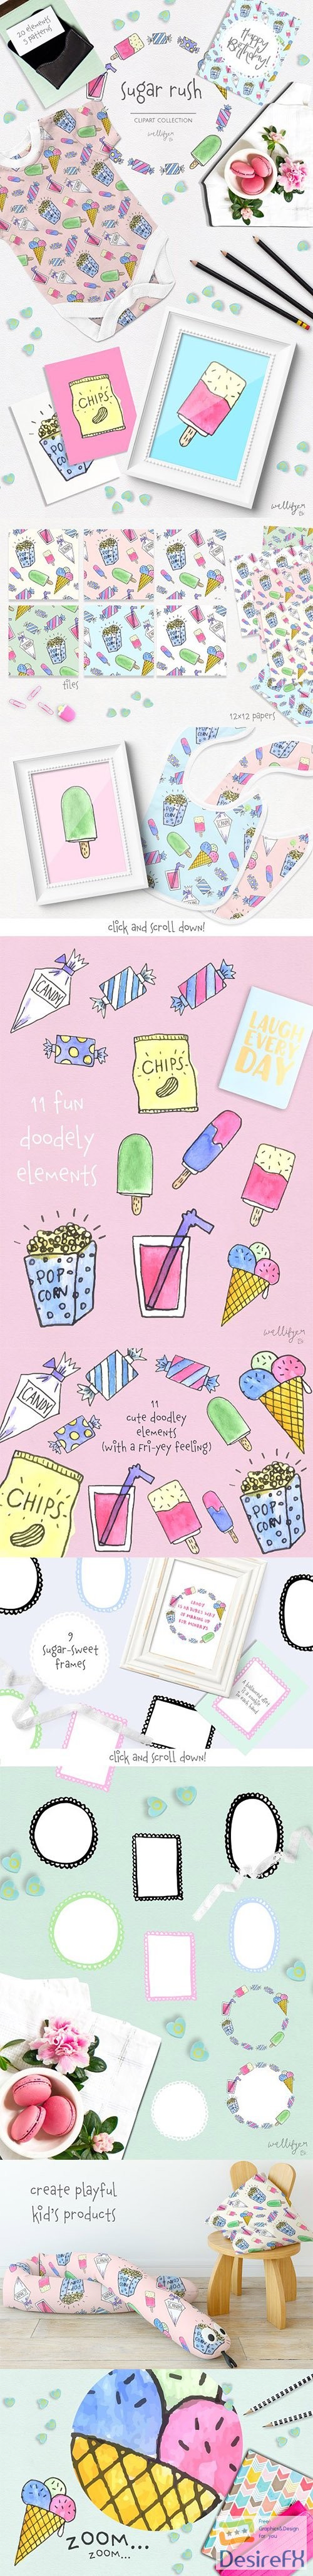 CreativeMarket - Candy clipart collection 2365969